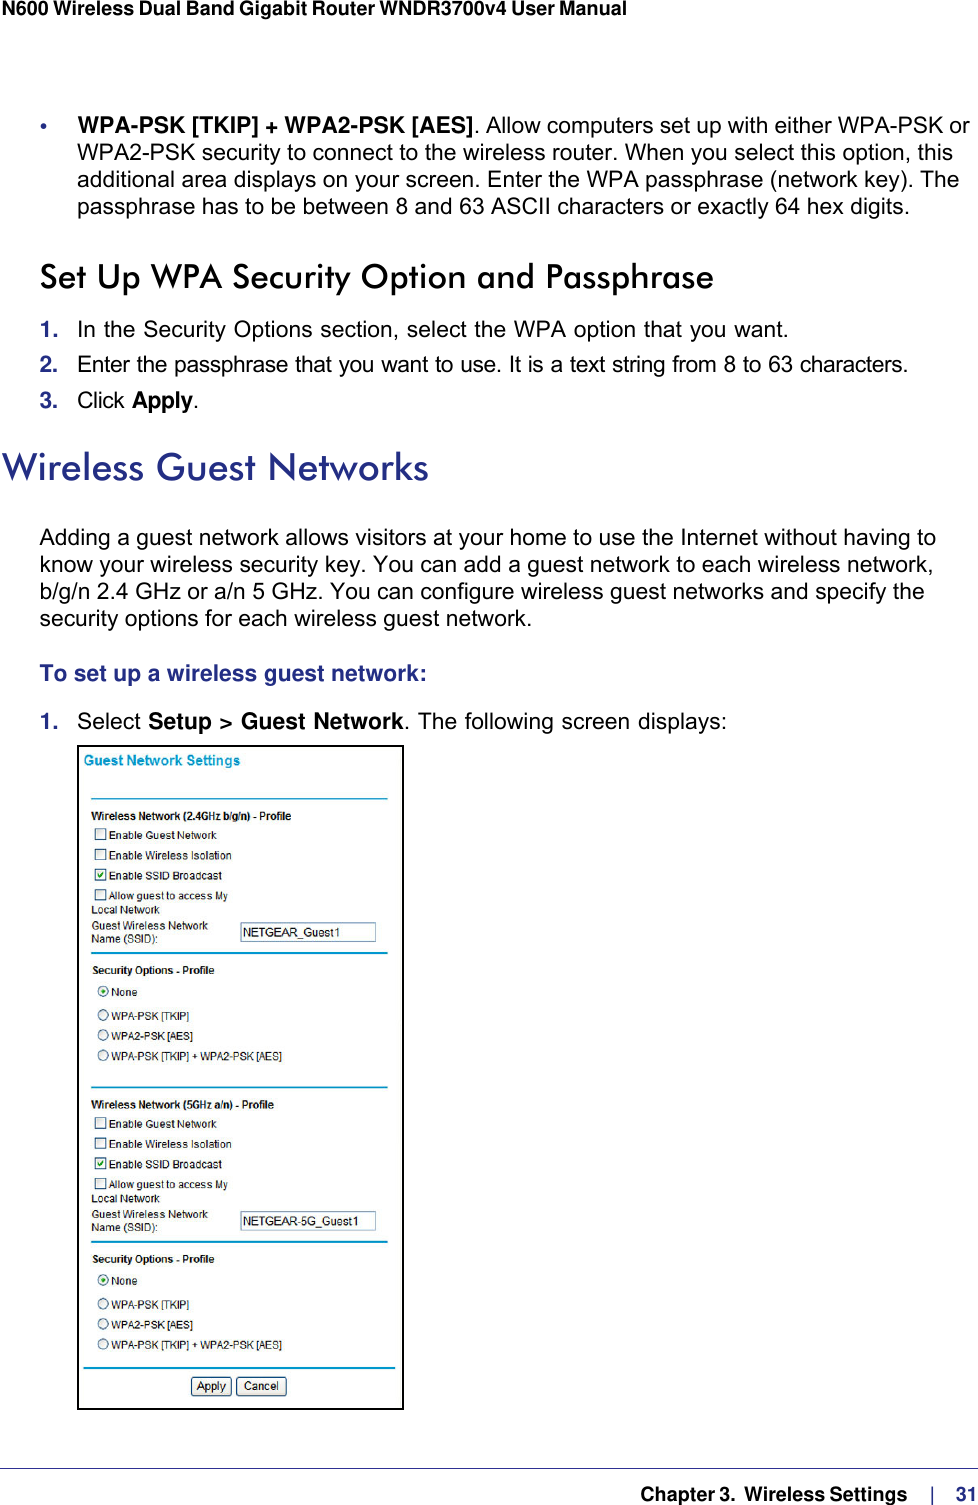   Chapter 3.  Wireless Settings     |    31N600 Wireless Dual Band Gigabit Router WNDR3700v4 User Manual •     WPA-PSK [TKIP] + WPA2-PSK [AES]. Allow computers set up with either WPA-PSK or WPA2-PSK security to connect to the wireless router. When you select this option, this additional area displays on your screen. Enter the WPA passphrase (network key). The passphrase has to be between 8 and 63 ASCII characters or exactly 64 hex digits.Set Up WPA Security Option and Passphrase1.  In the Security Options section, select the WPA option that you want.2.  Enter the passphrase that you want to use. It is a text string from 8 to 63 characters.3.  Click Apply.Wireless Guest NetworksAdding a guest network allows visitors at your home to use the Internet without having to know your wireless security key. You can add a guest network to each wireless network, b/g/n 2.4 GHz or a/n 5 GHz. You can configure wireless guest networks and specify the security options for each wireless guest network. To set up a wireless guest network:1.  Select Setup &gt; Guest Network. The following screen displays: